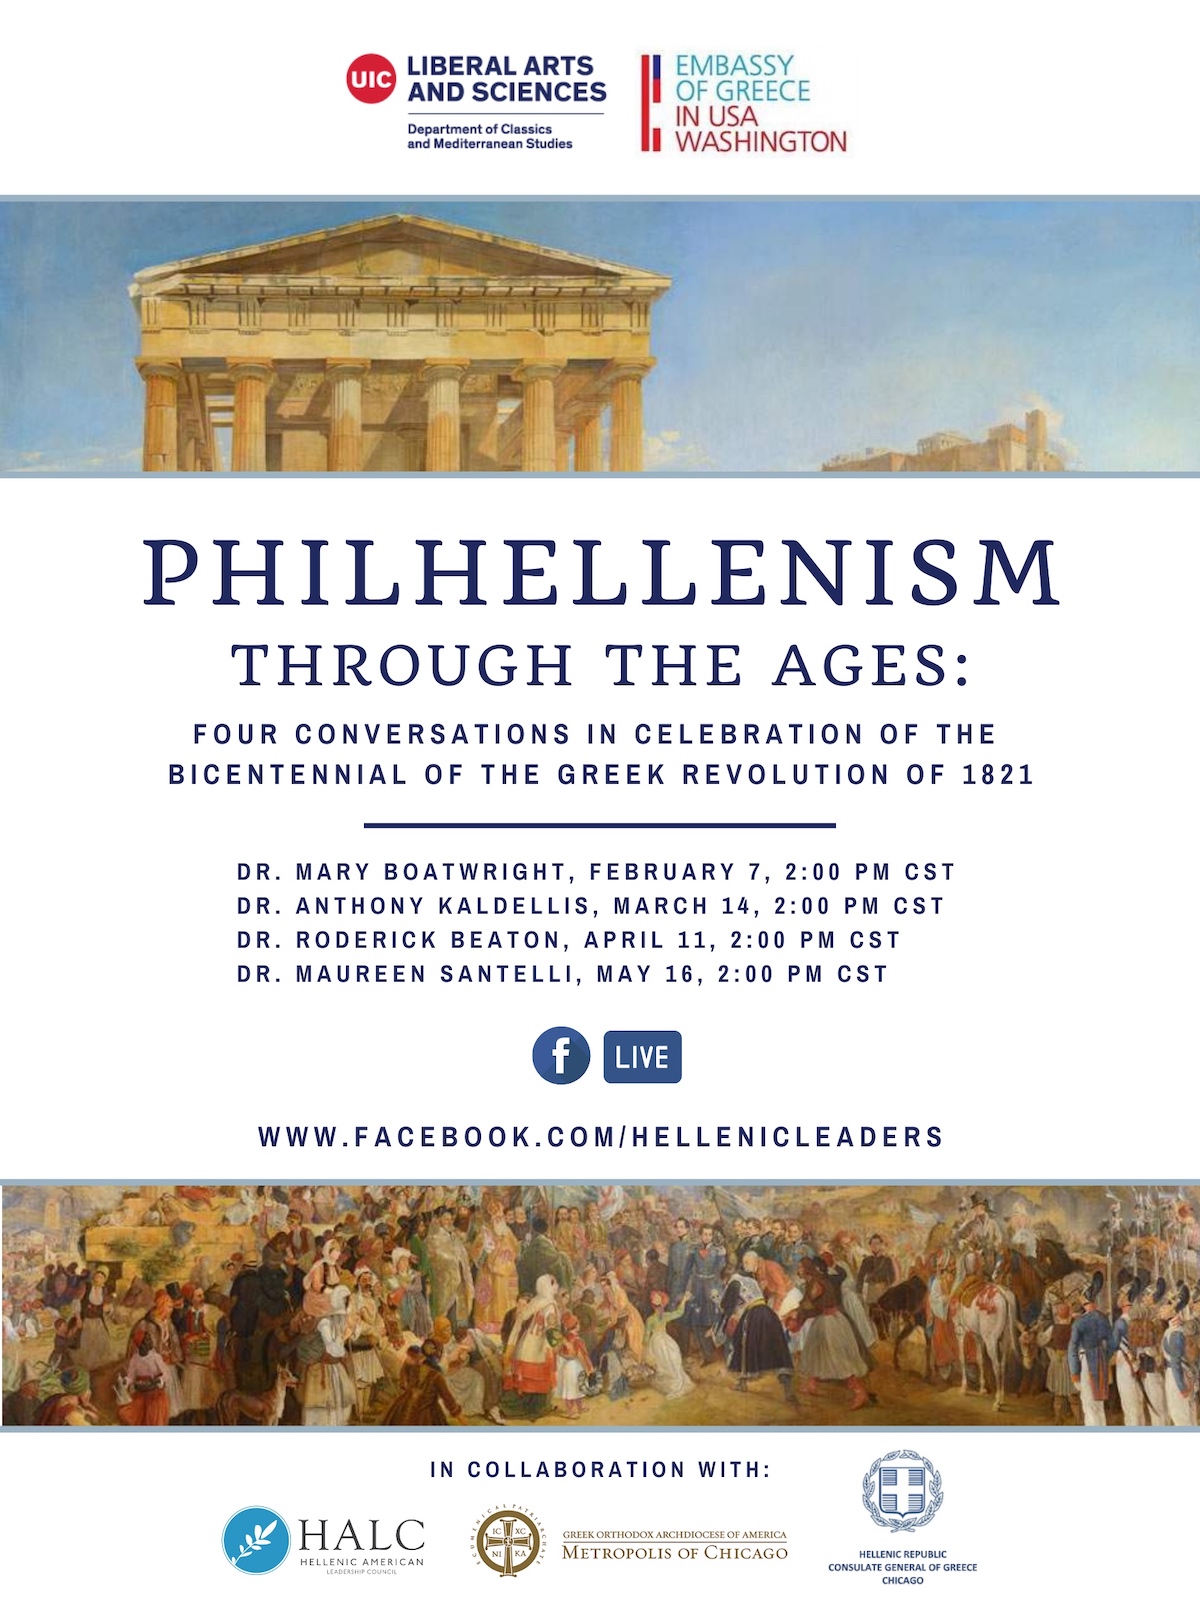 Philhellenism Through the Ages: Four Conversations in Celebration of the Bicentennial of the Greek Revolution of 1821